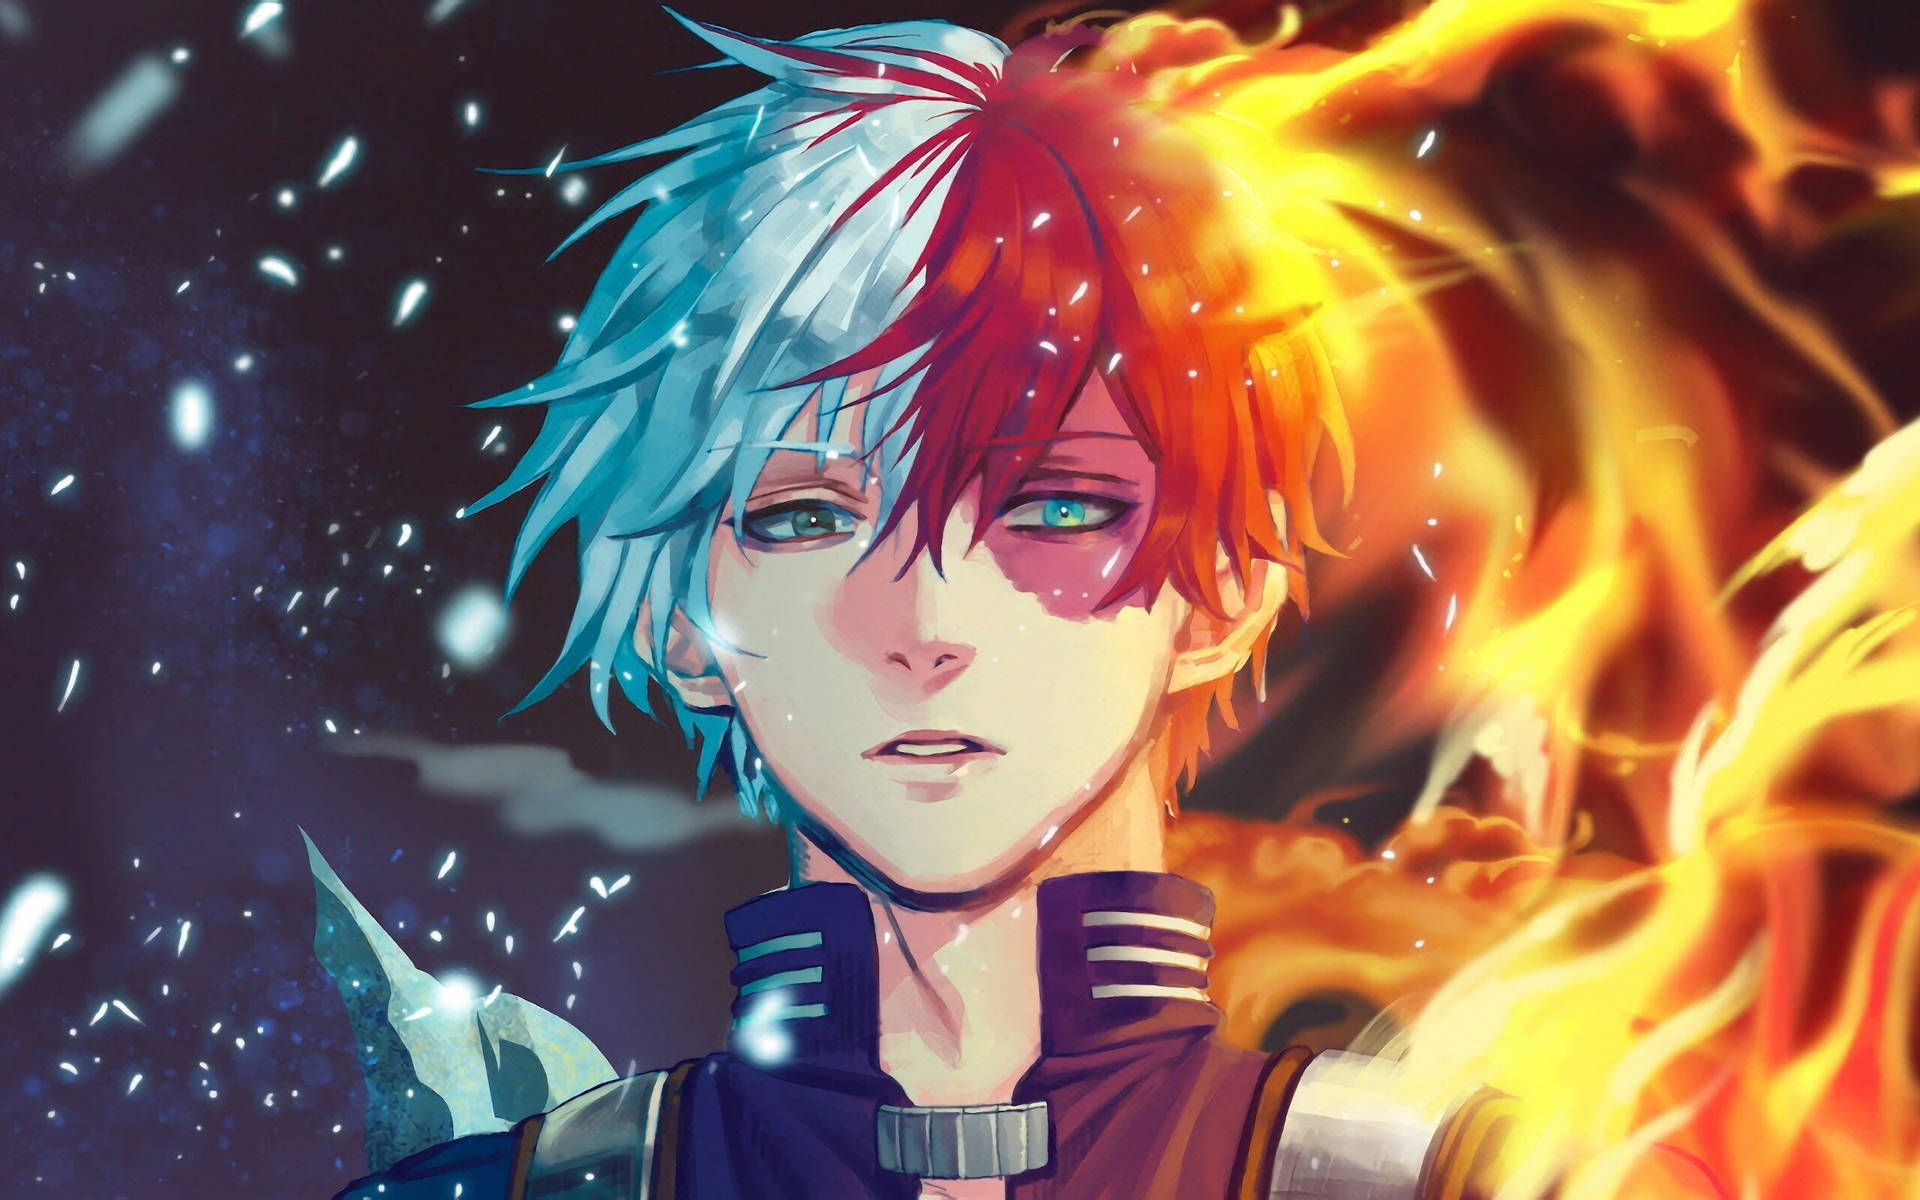 Download Shoto Ice And Fire Anime Poster Wallpaper | Wallpapers.com